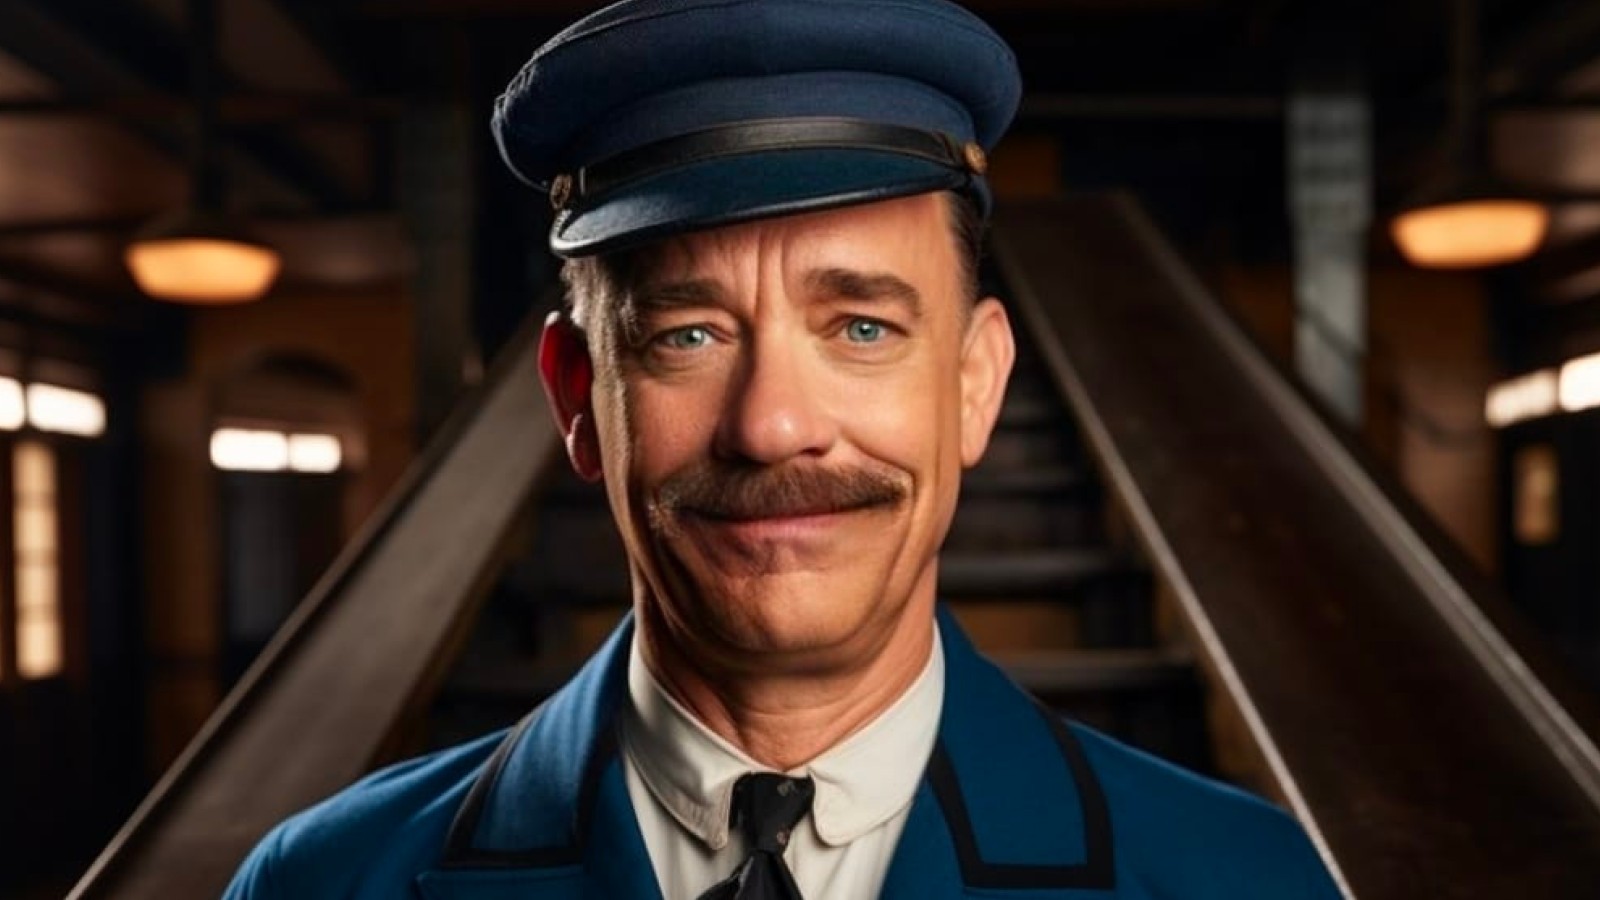 The Polar Express' May Share Its Universe With 3 Iconic Franchises! -  Inside the Magic